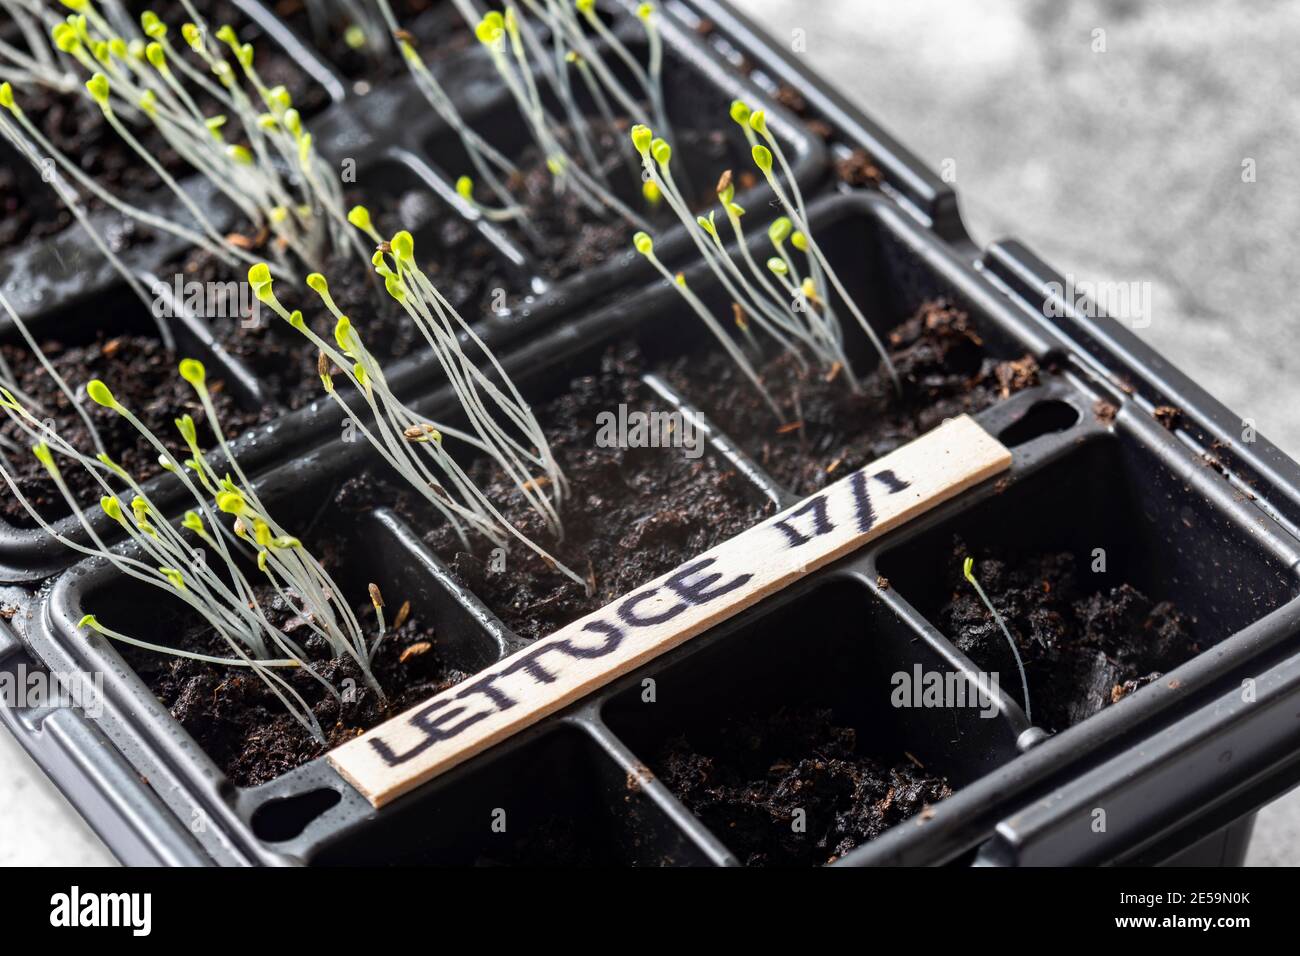 Lettuce seedlings in plastic seed trays labelled with date.  Concrete background Stock Photo